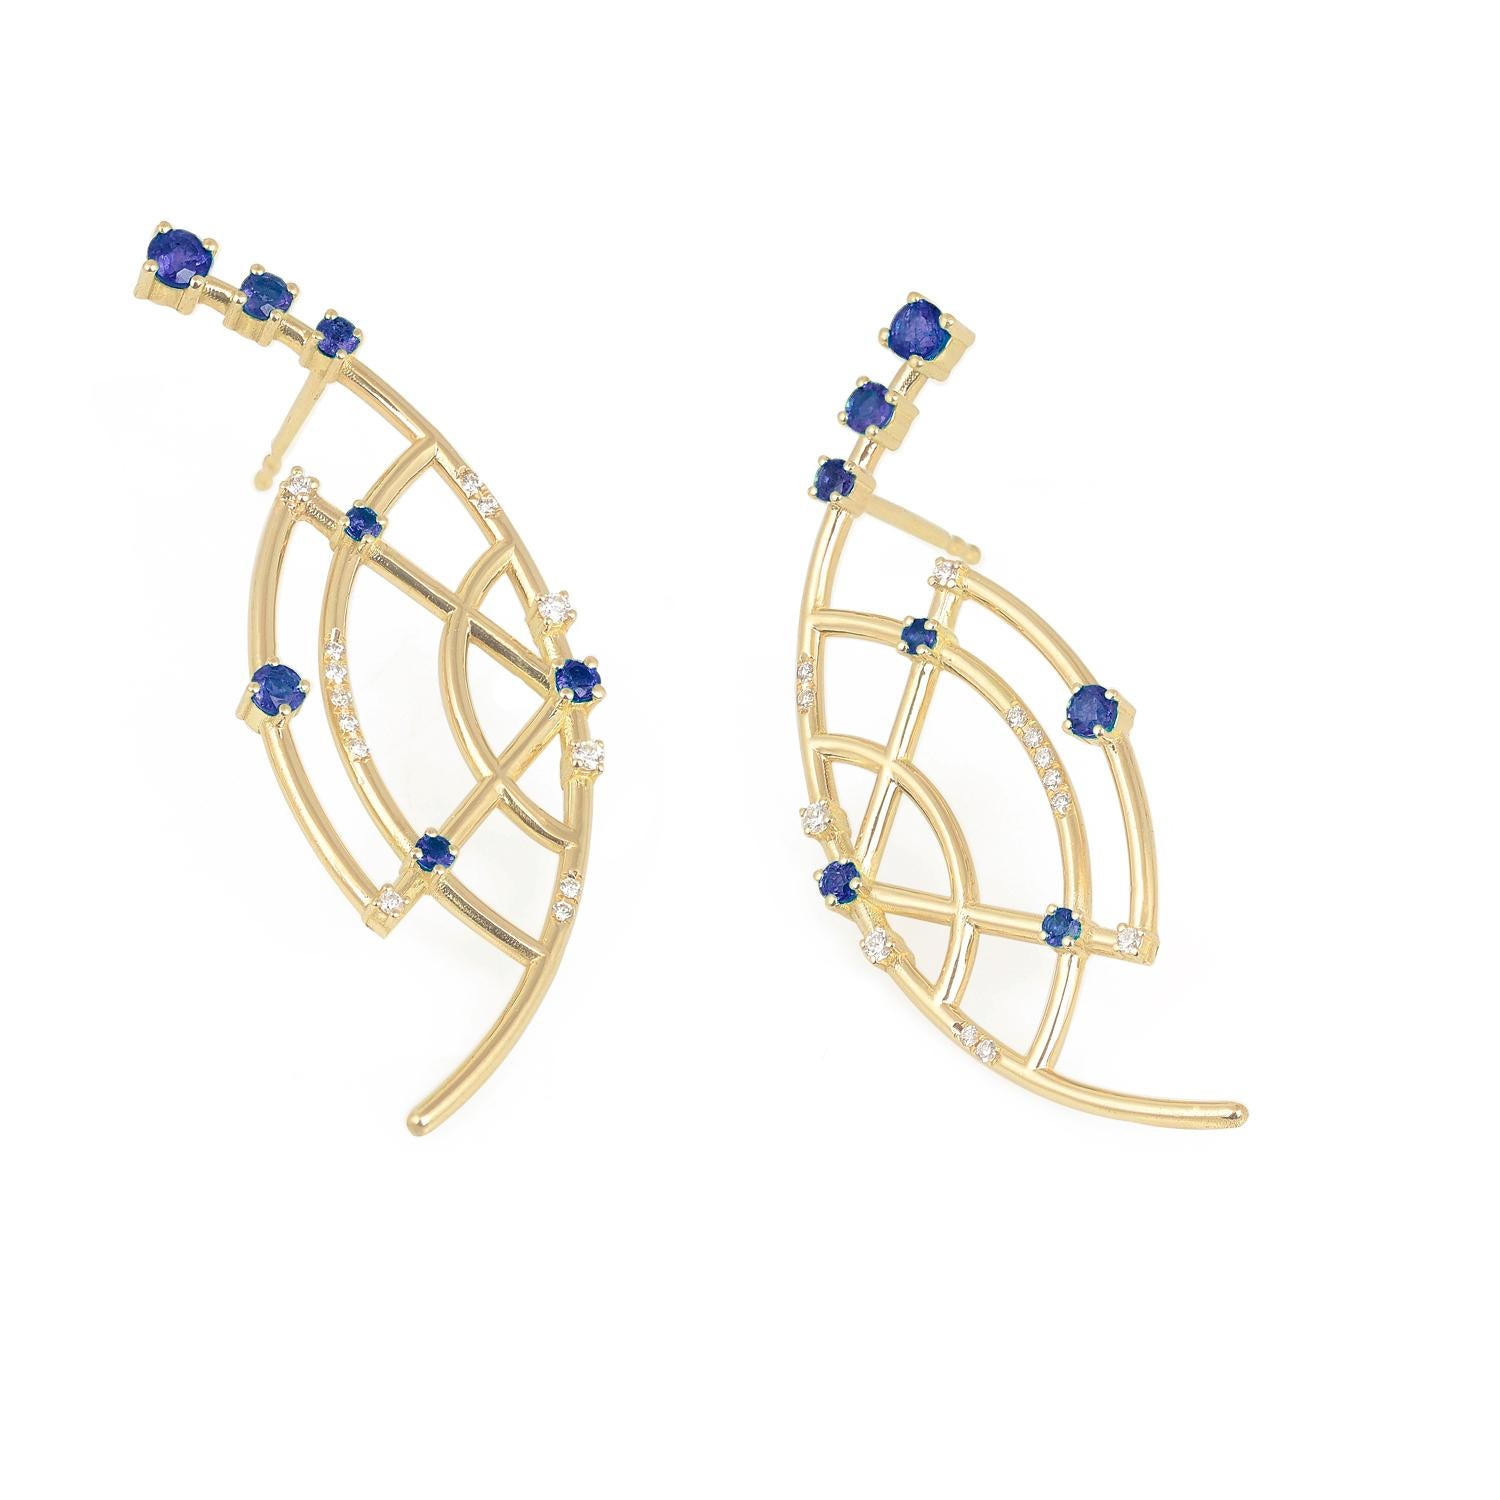 Designer: Alexia Gryllaki
Dimensions: L48x17mm
Weight: approximately 8.6g (pair)
Barcode: ING036ES

The Interlocking Geometry earrings in 18 karat yellow gold with sapphires approx. 1.02cts and round brilliant-cut diamonds approx. 0.18cts.

About